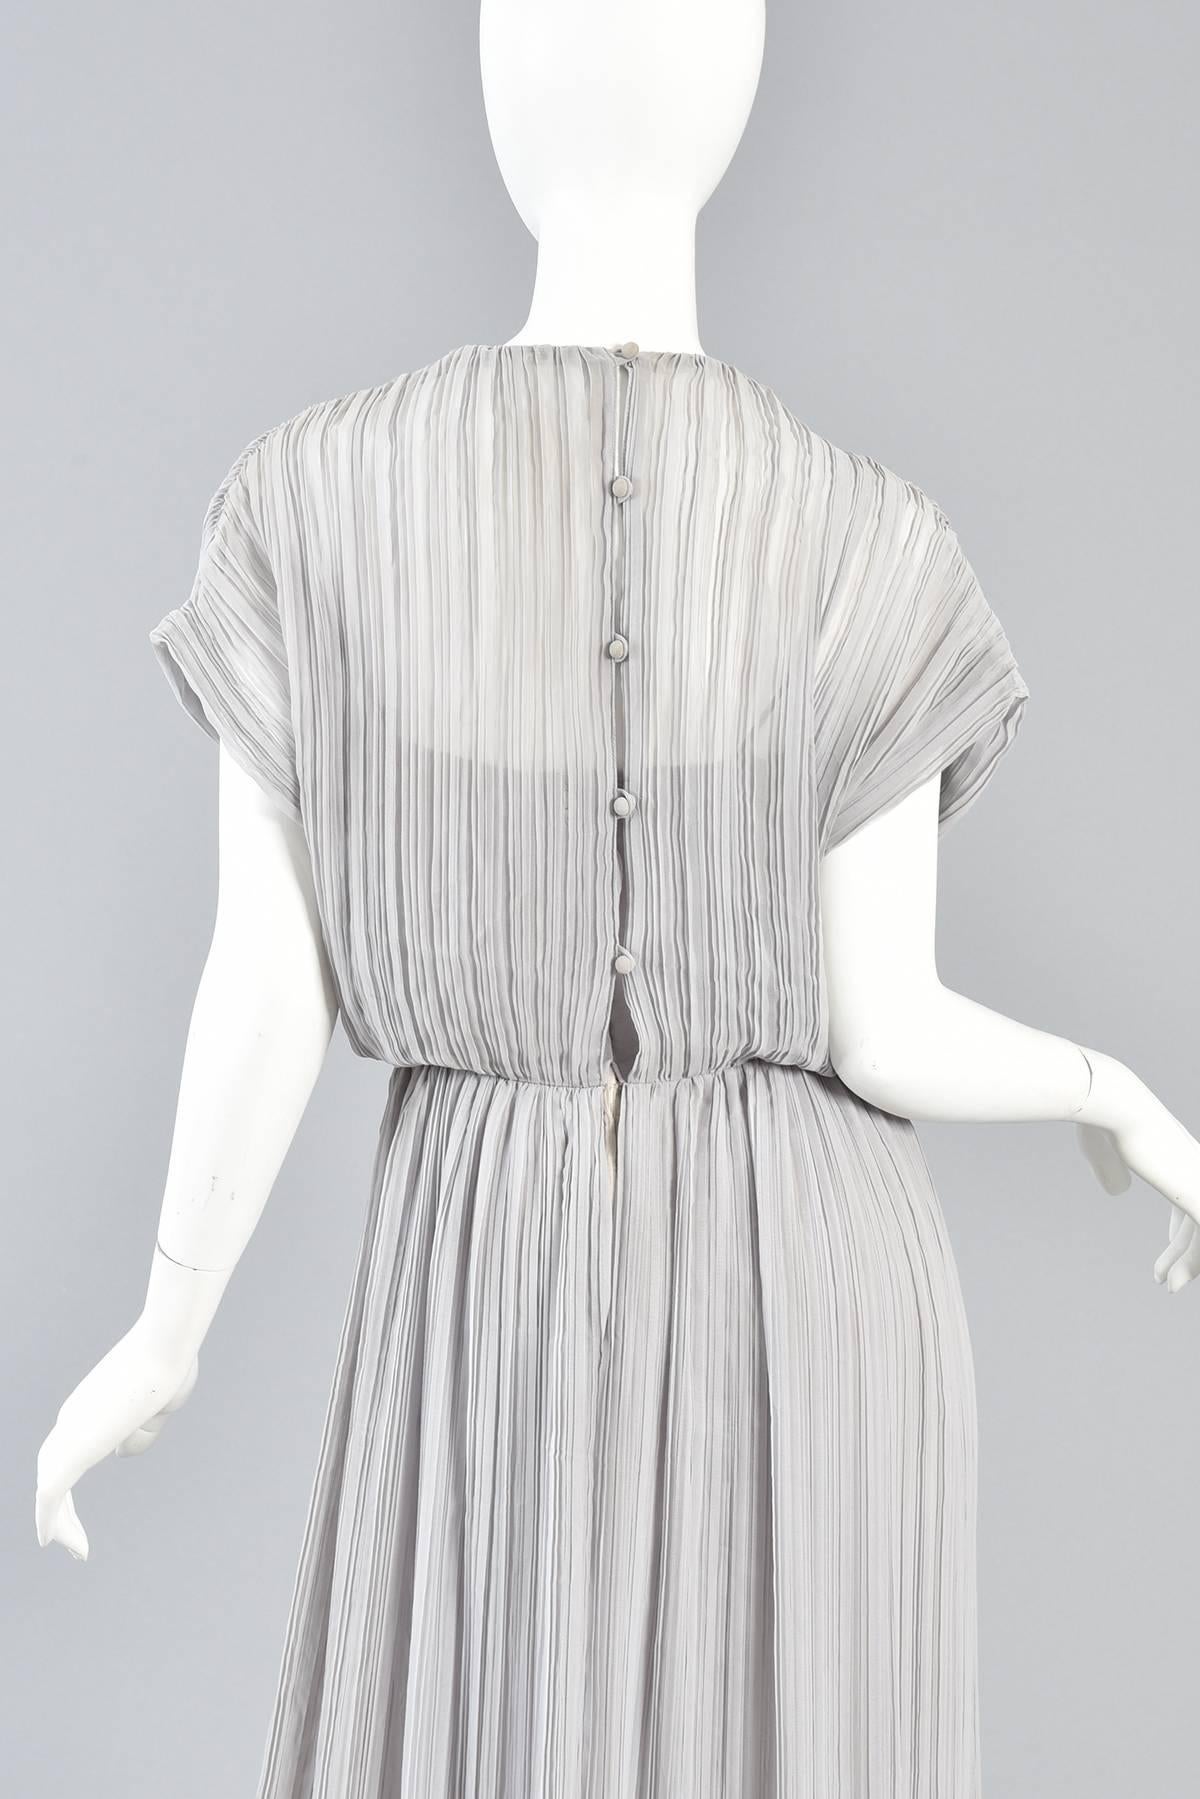 Victor Costa Dove Grey Grecian Pleated Evening Gown For Sale 4